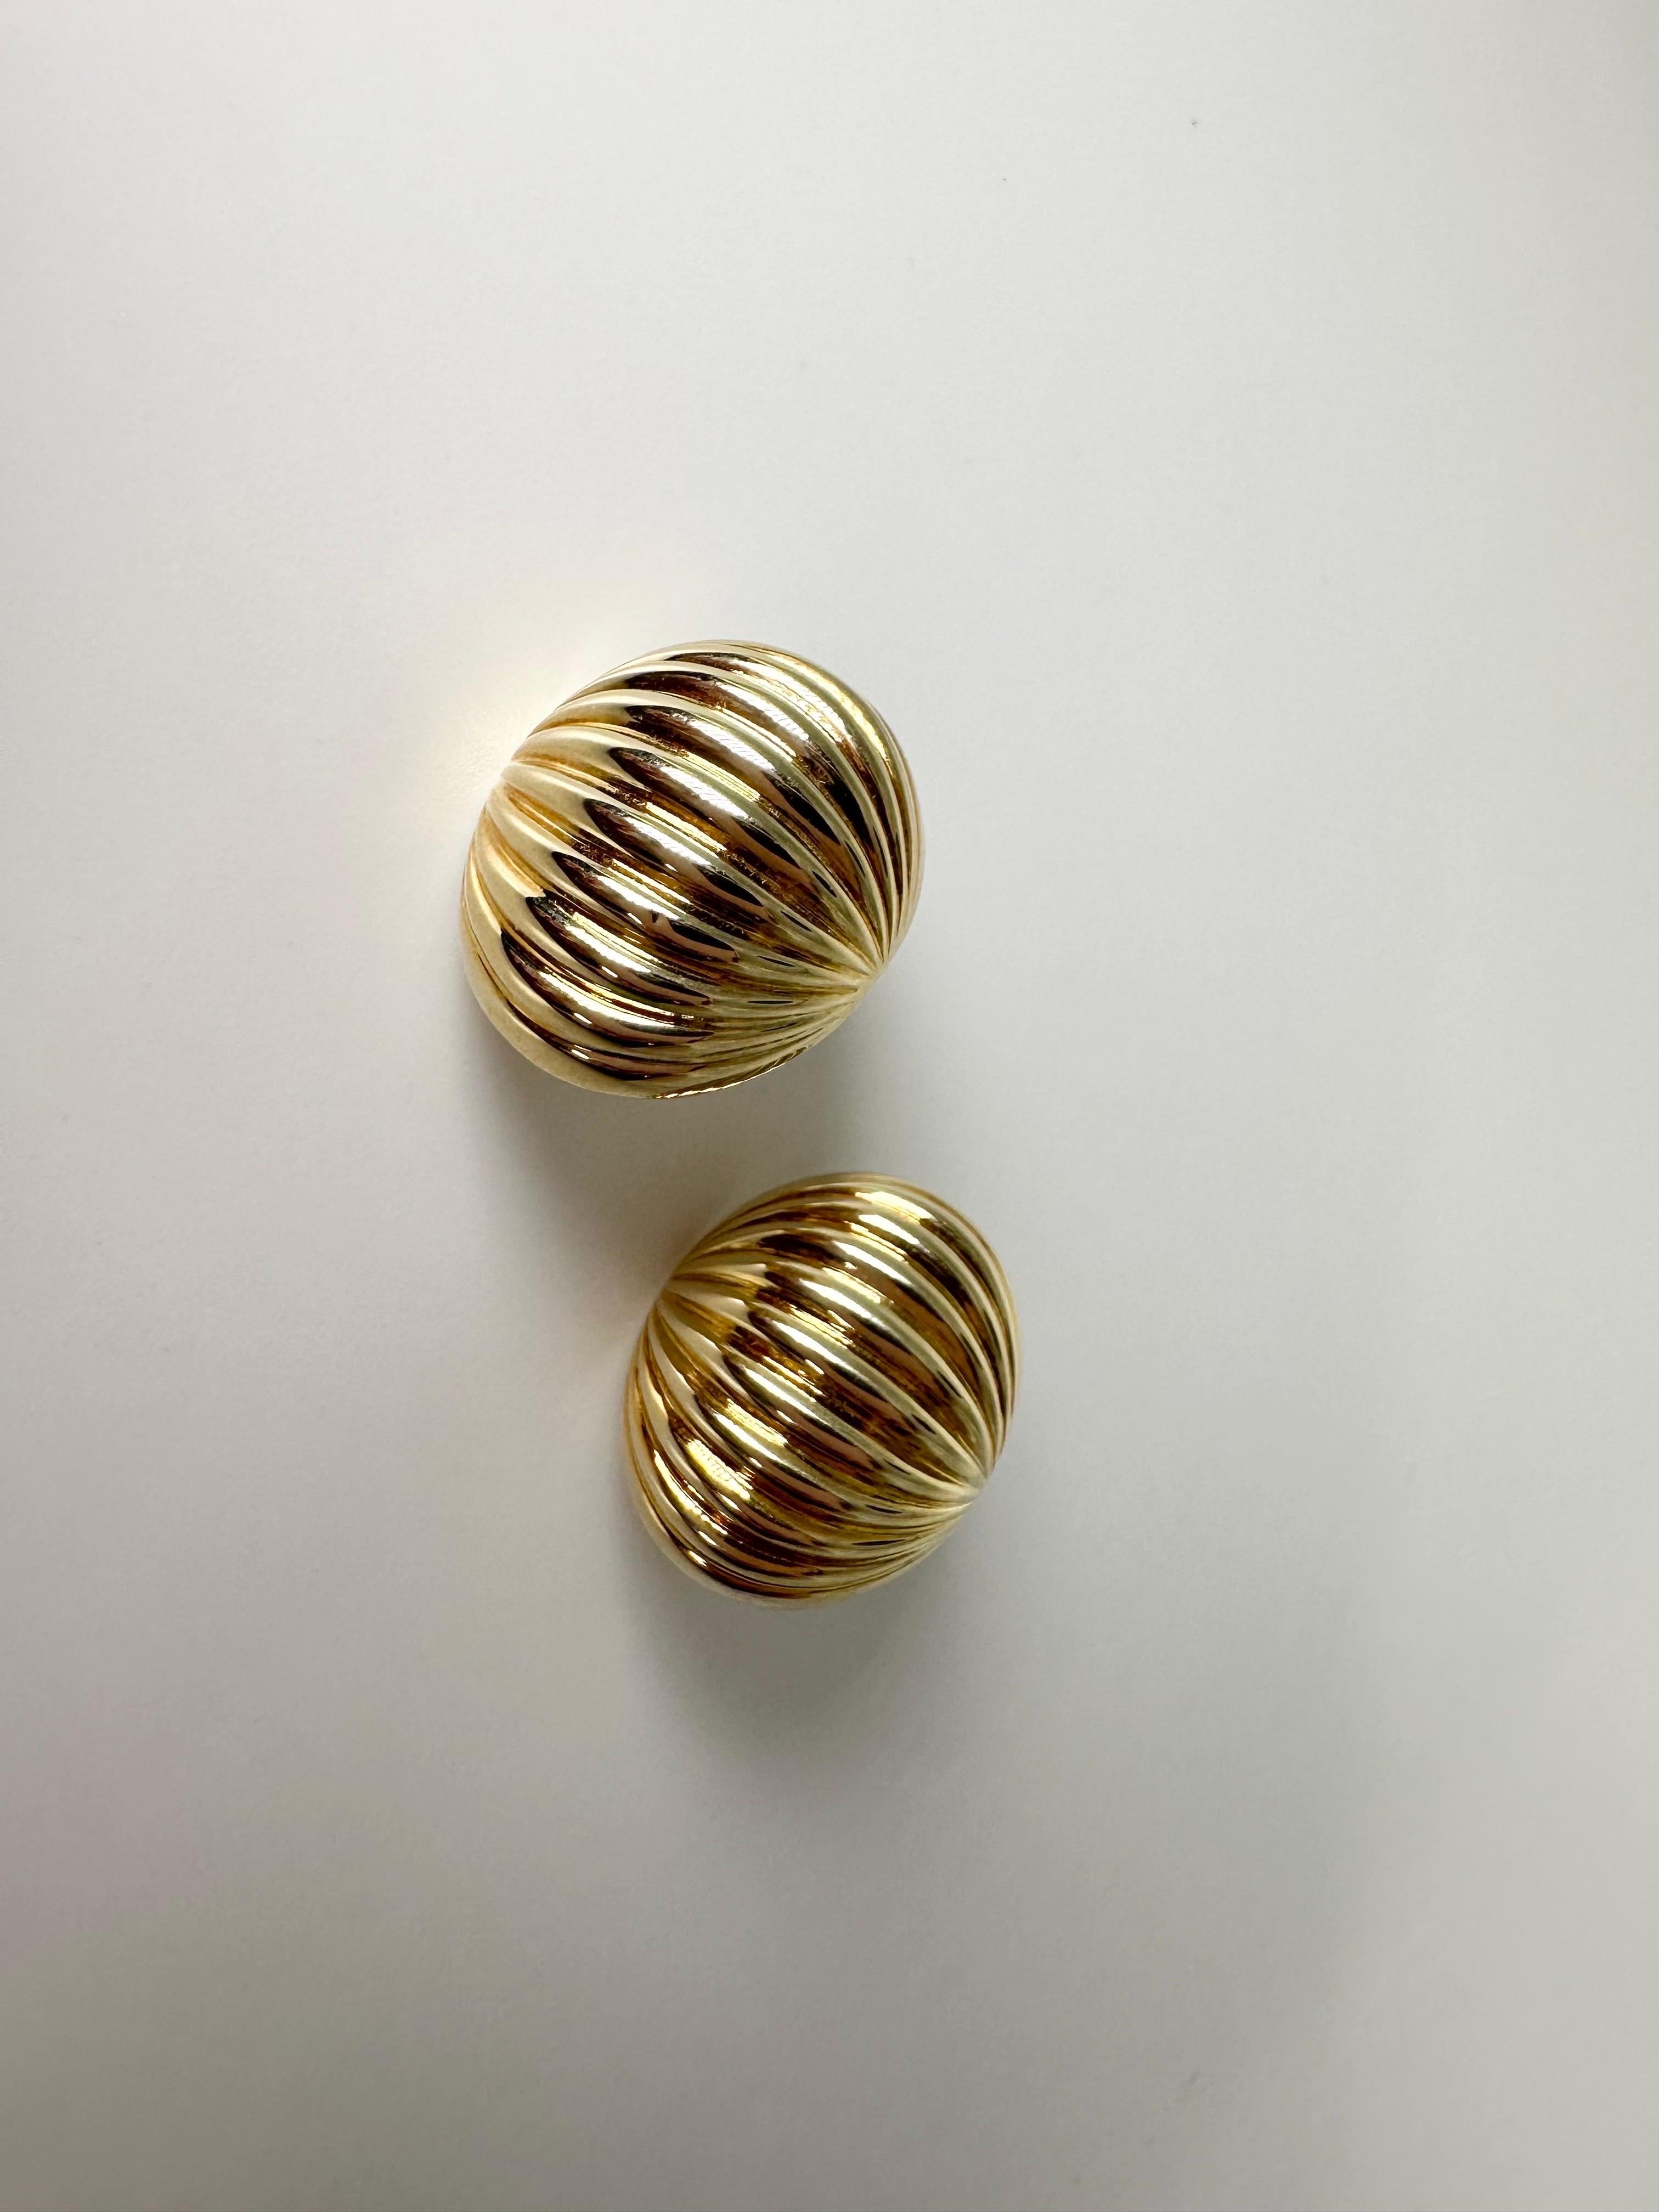 Stunning on the ears!!! Take a look at these unique shell earrings, made with excellent craftsmanship and texture in 14KT yellow gold. These are omega clips for extra comfort!

GOLD: 14KT gold
Grams:5.51
size: 7.5
Item#: 425-00011KAT

WHAT YOU GET